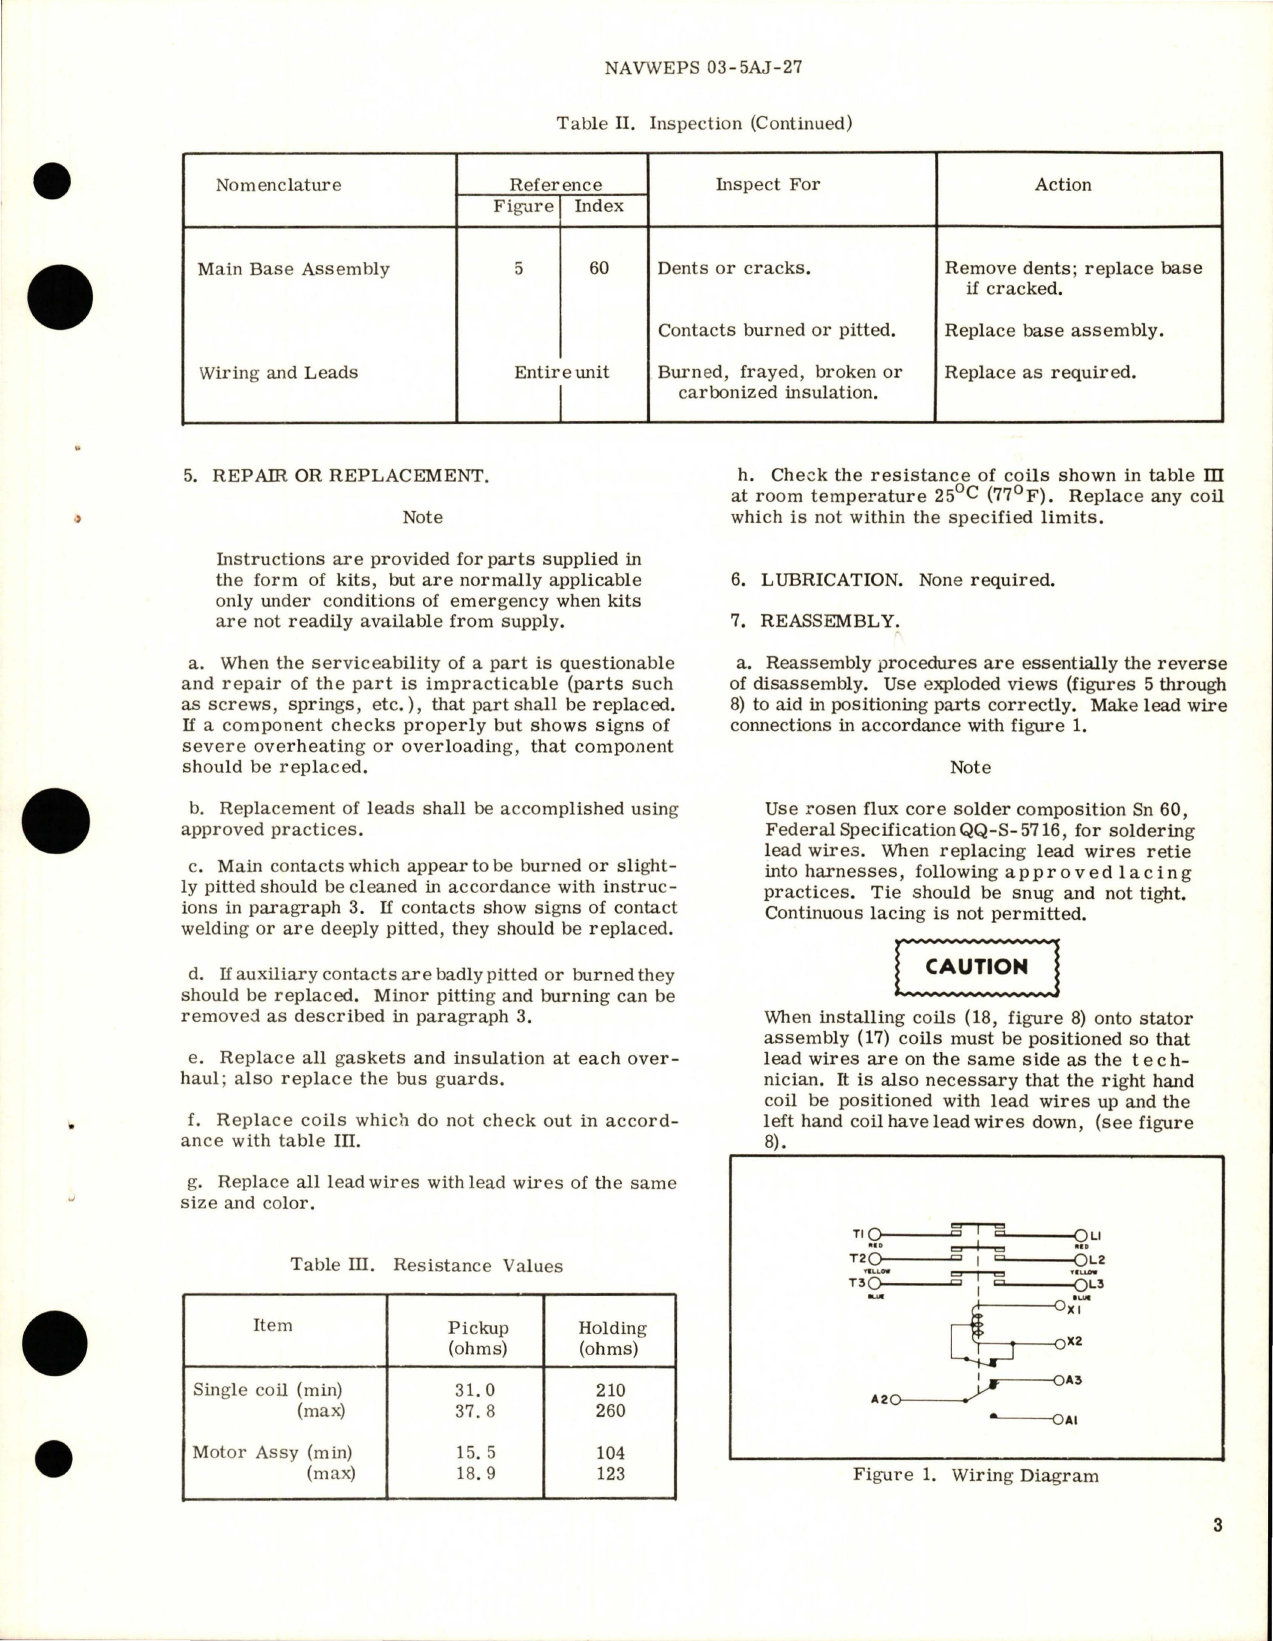 Sample page 5 from AirCorps Library document: Overhaul Instructions with Illustrated Parts Breakdown for Triple Pole Single Throw Normally Open Contractor - Part B-133